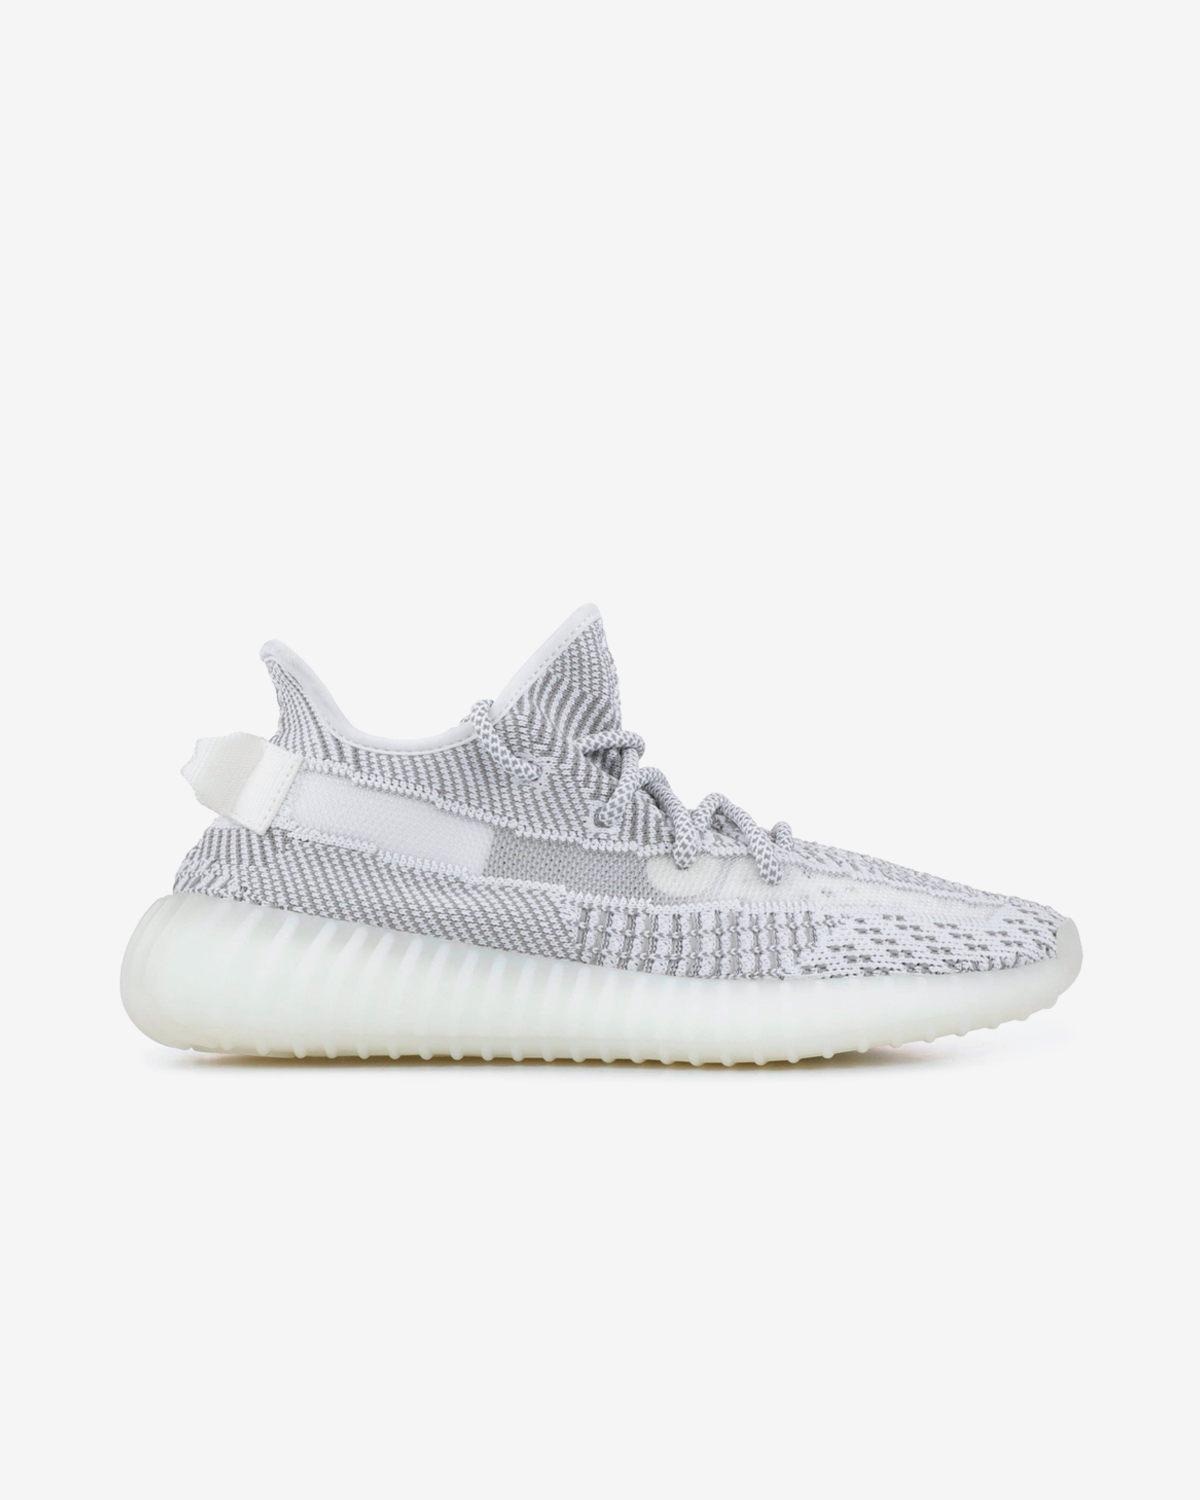 adidas YEEZY Boost 350 V2 "Static" (Non Reflective)